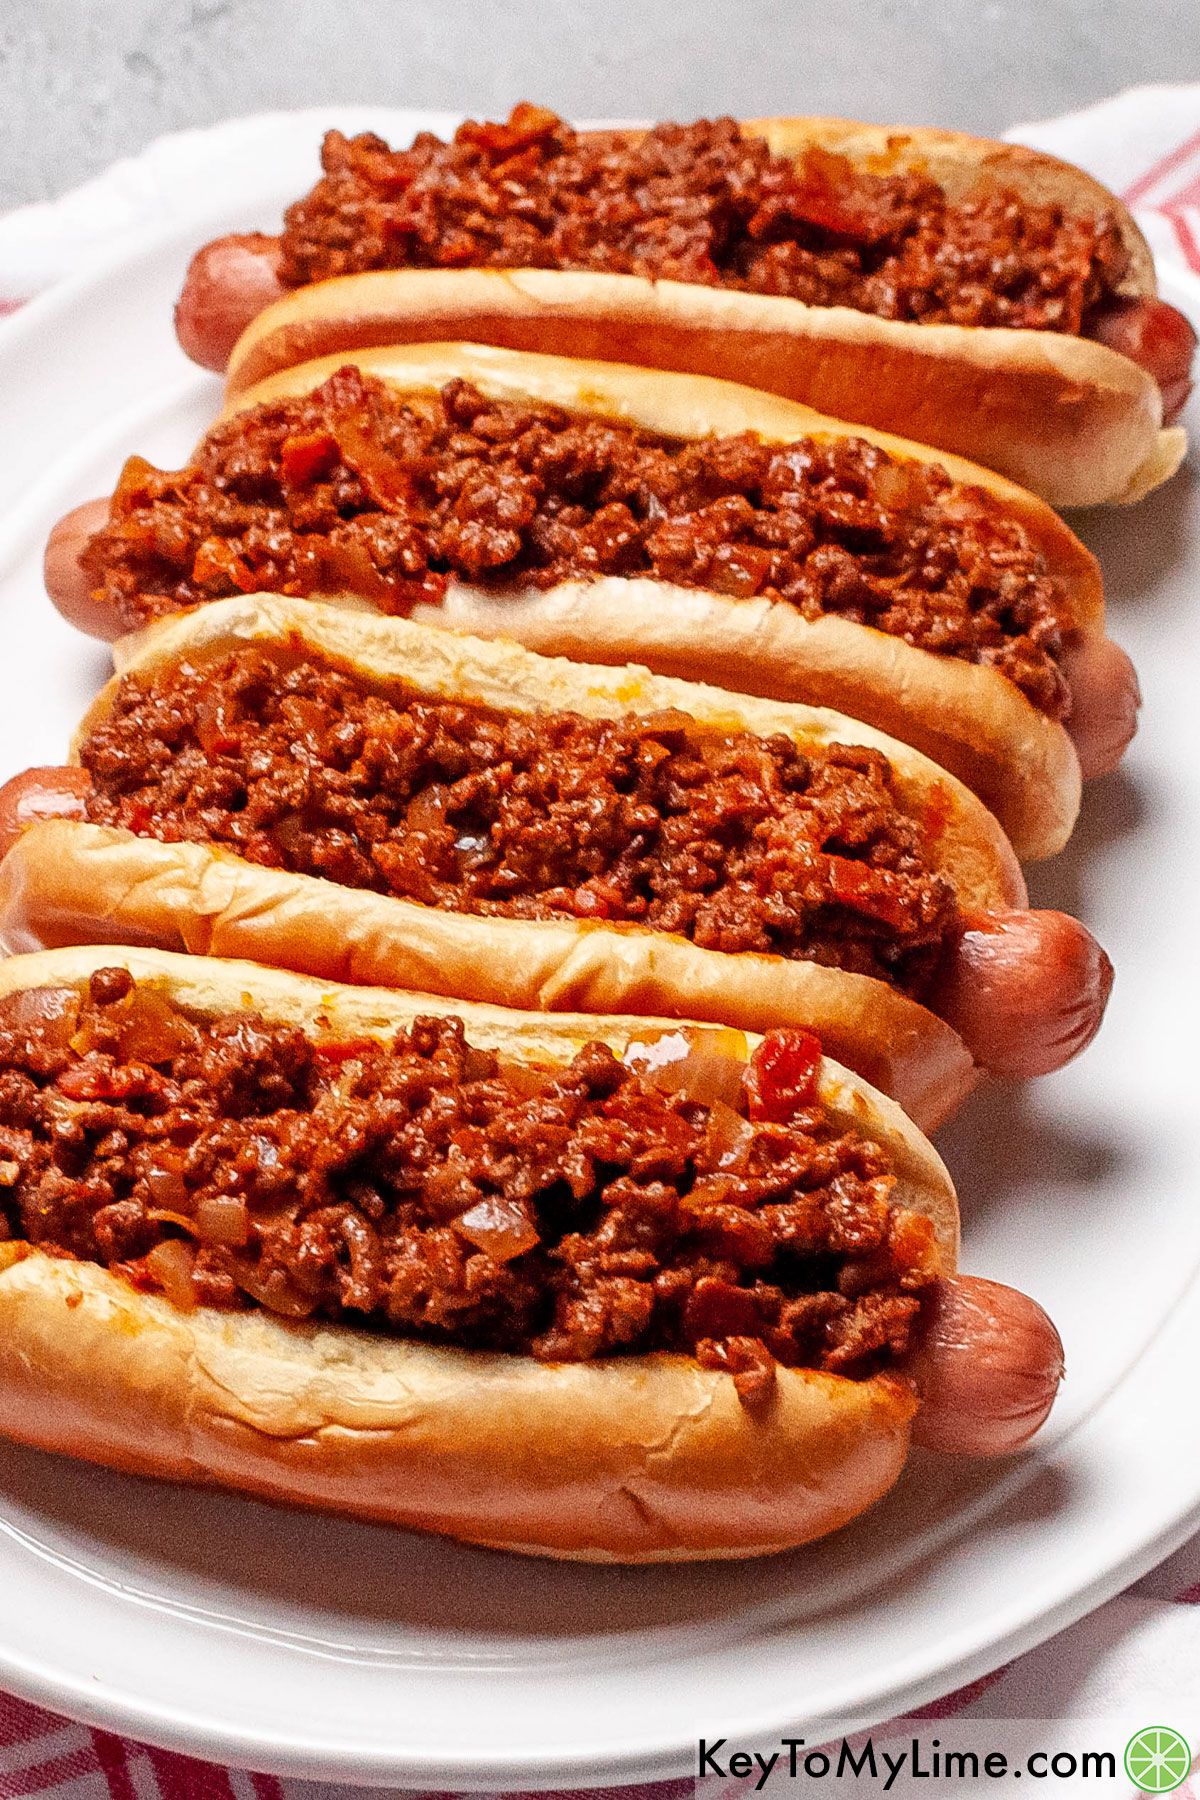 The best hot dog chili on top of hot dogs.